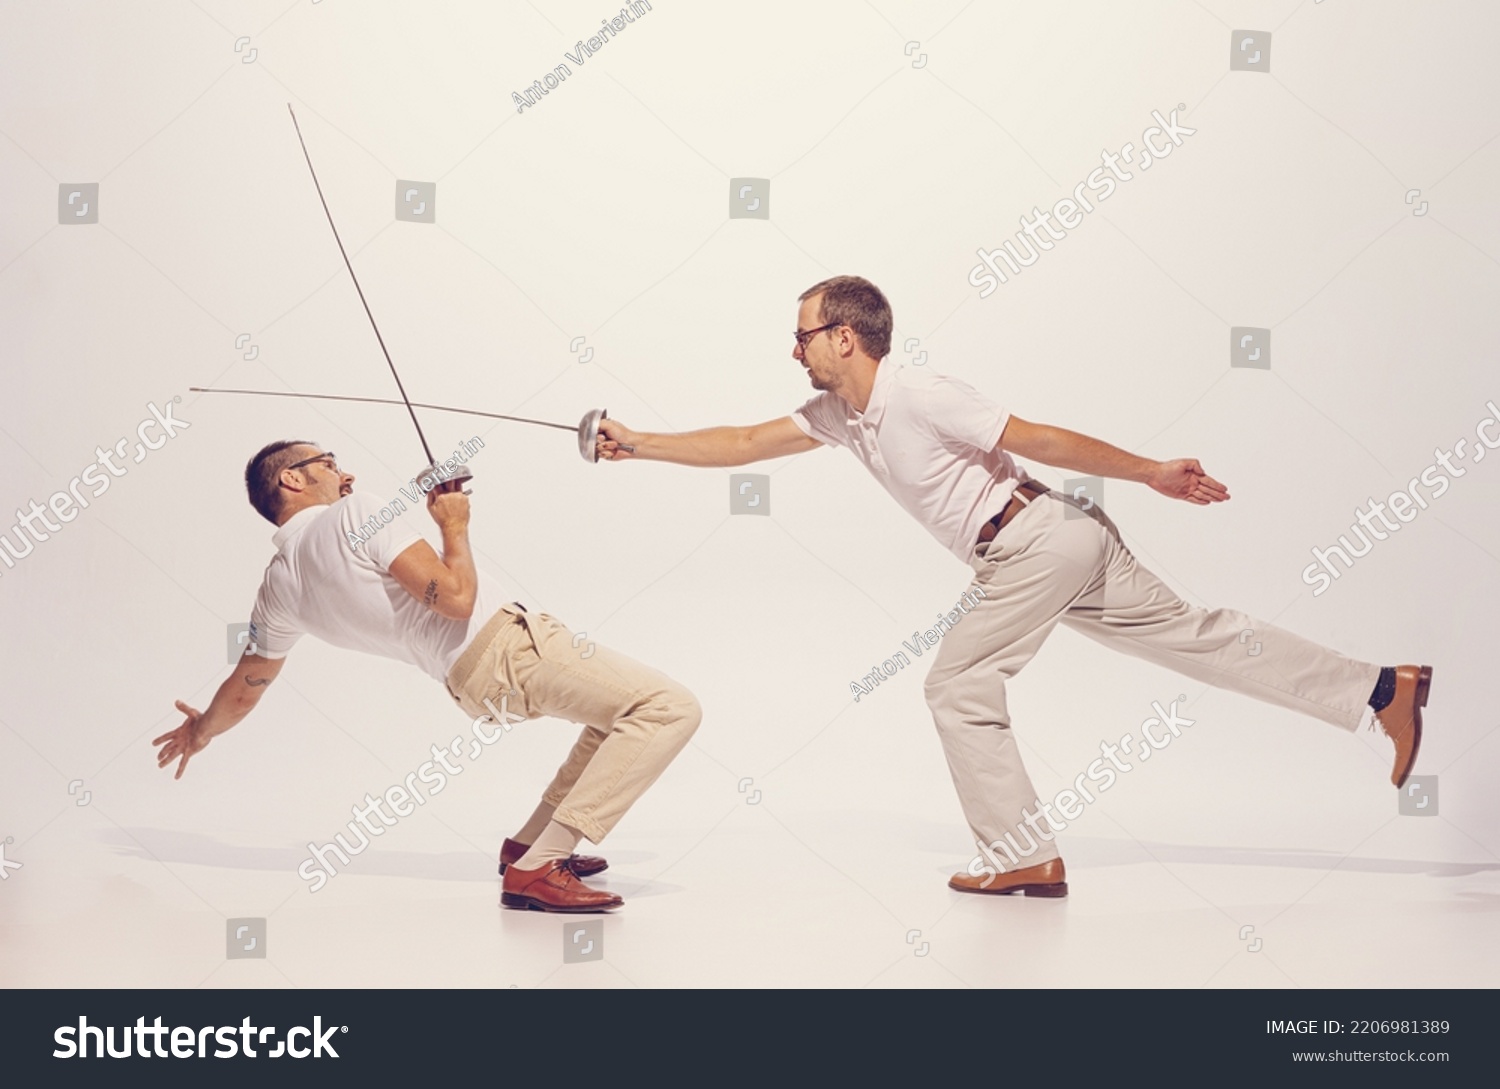 Portrait of two men in a suit fighting with swords isolated over grey studio background. Dynamic image. Concept of sport, hobby, emotions, active lifestyle, retro fashion. Copy space for ad #2206981389